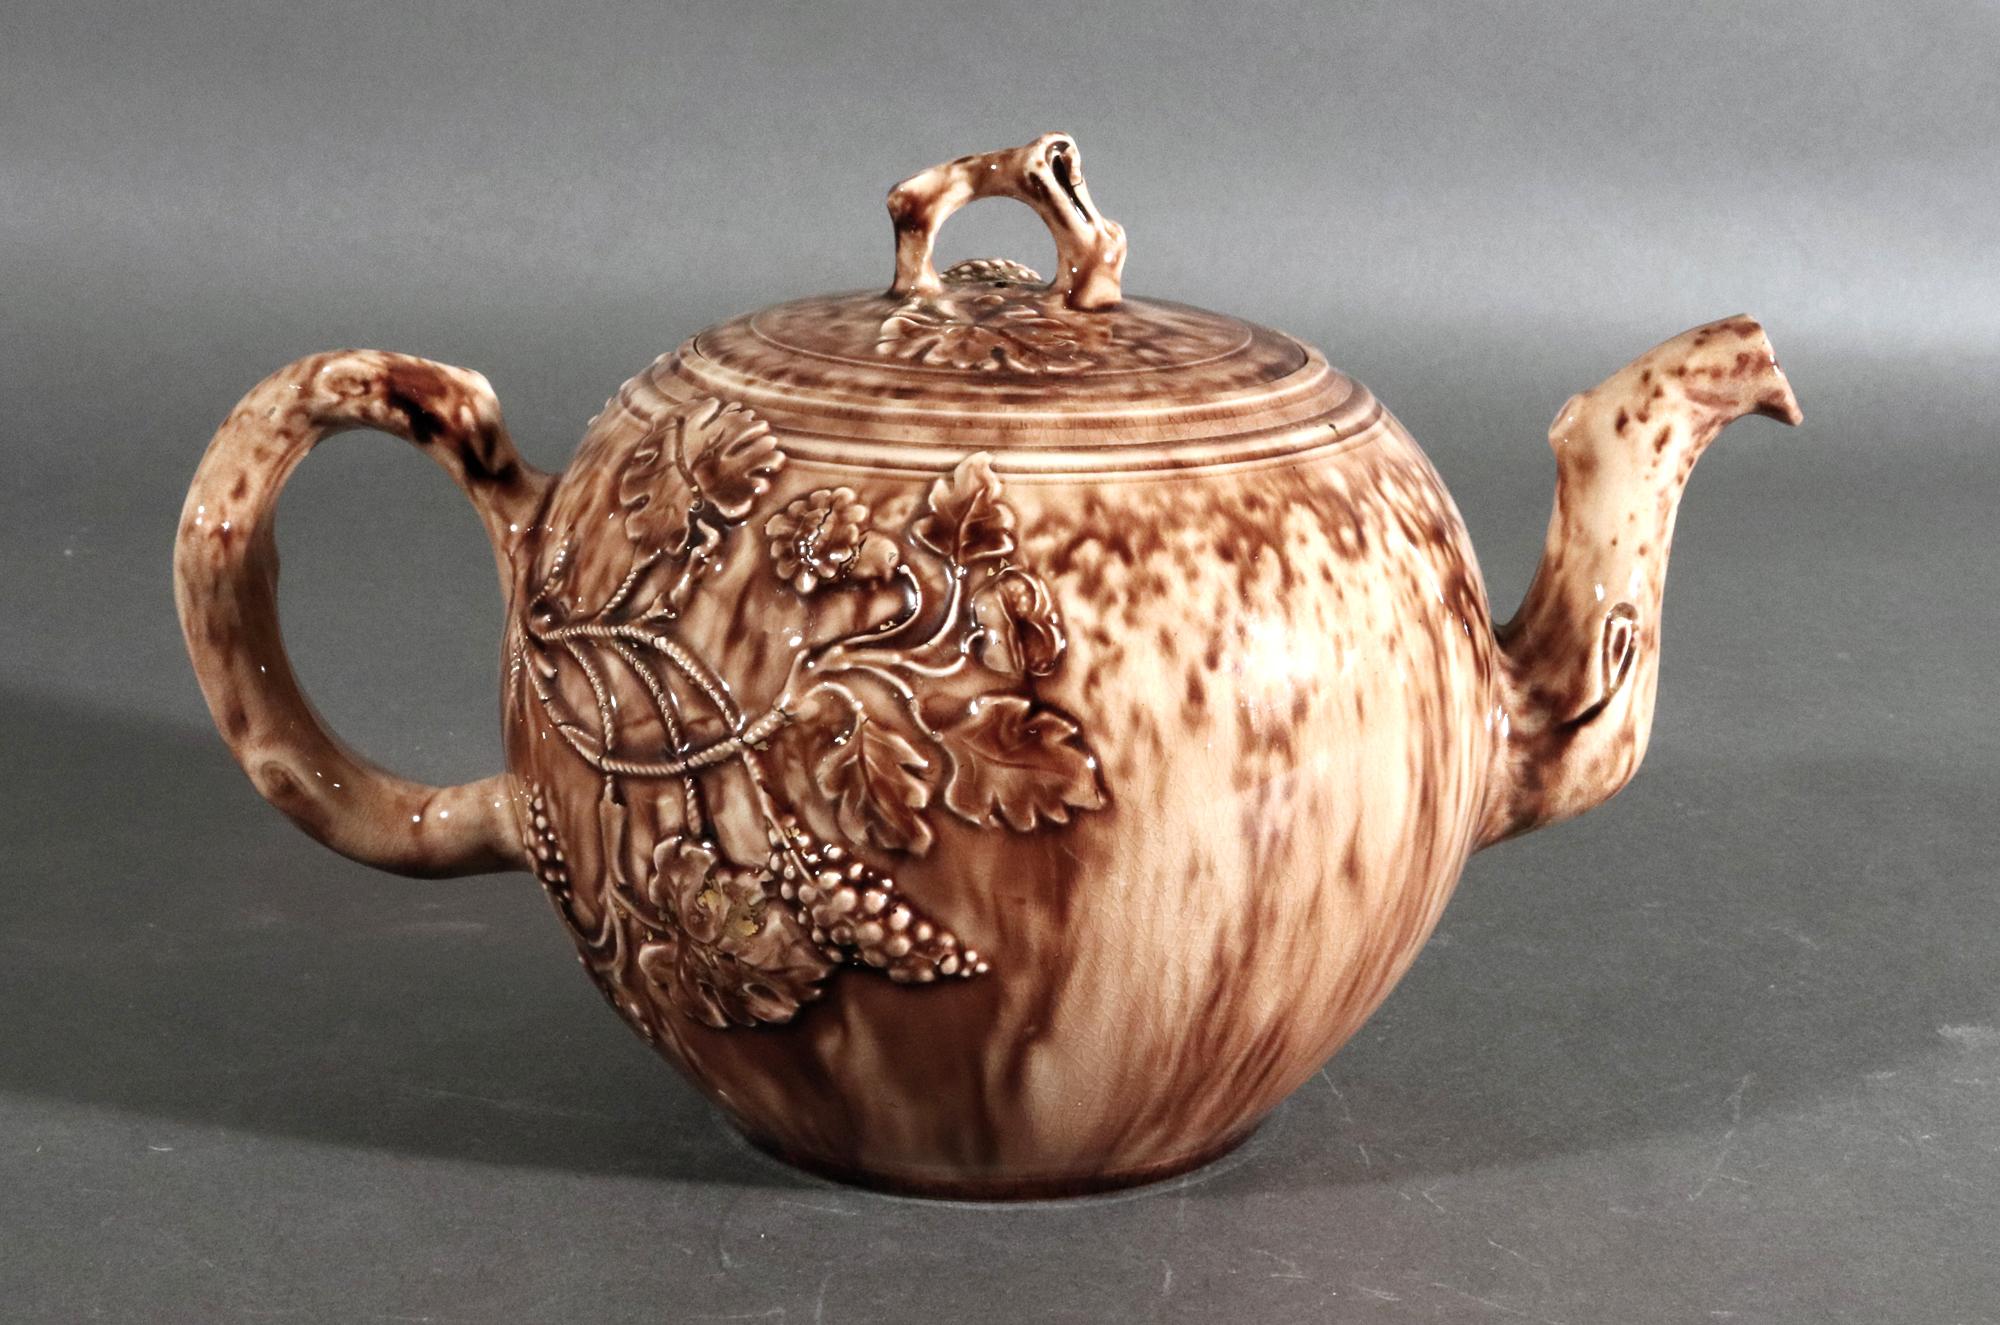 18th Century Whieldon-type Tortoise-shell Teapot and Cover,
Circa 1765

The tortoise-shell molded teapot and cover is decorated with a molded design of grapes and leaves issuing from the top of the crabstock handle with traces of the original honey